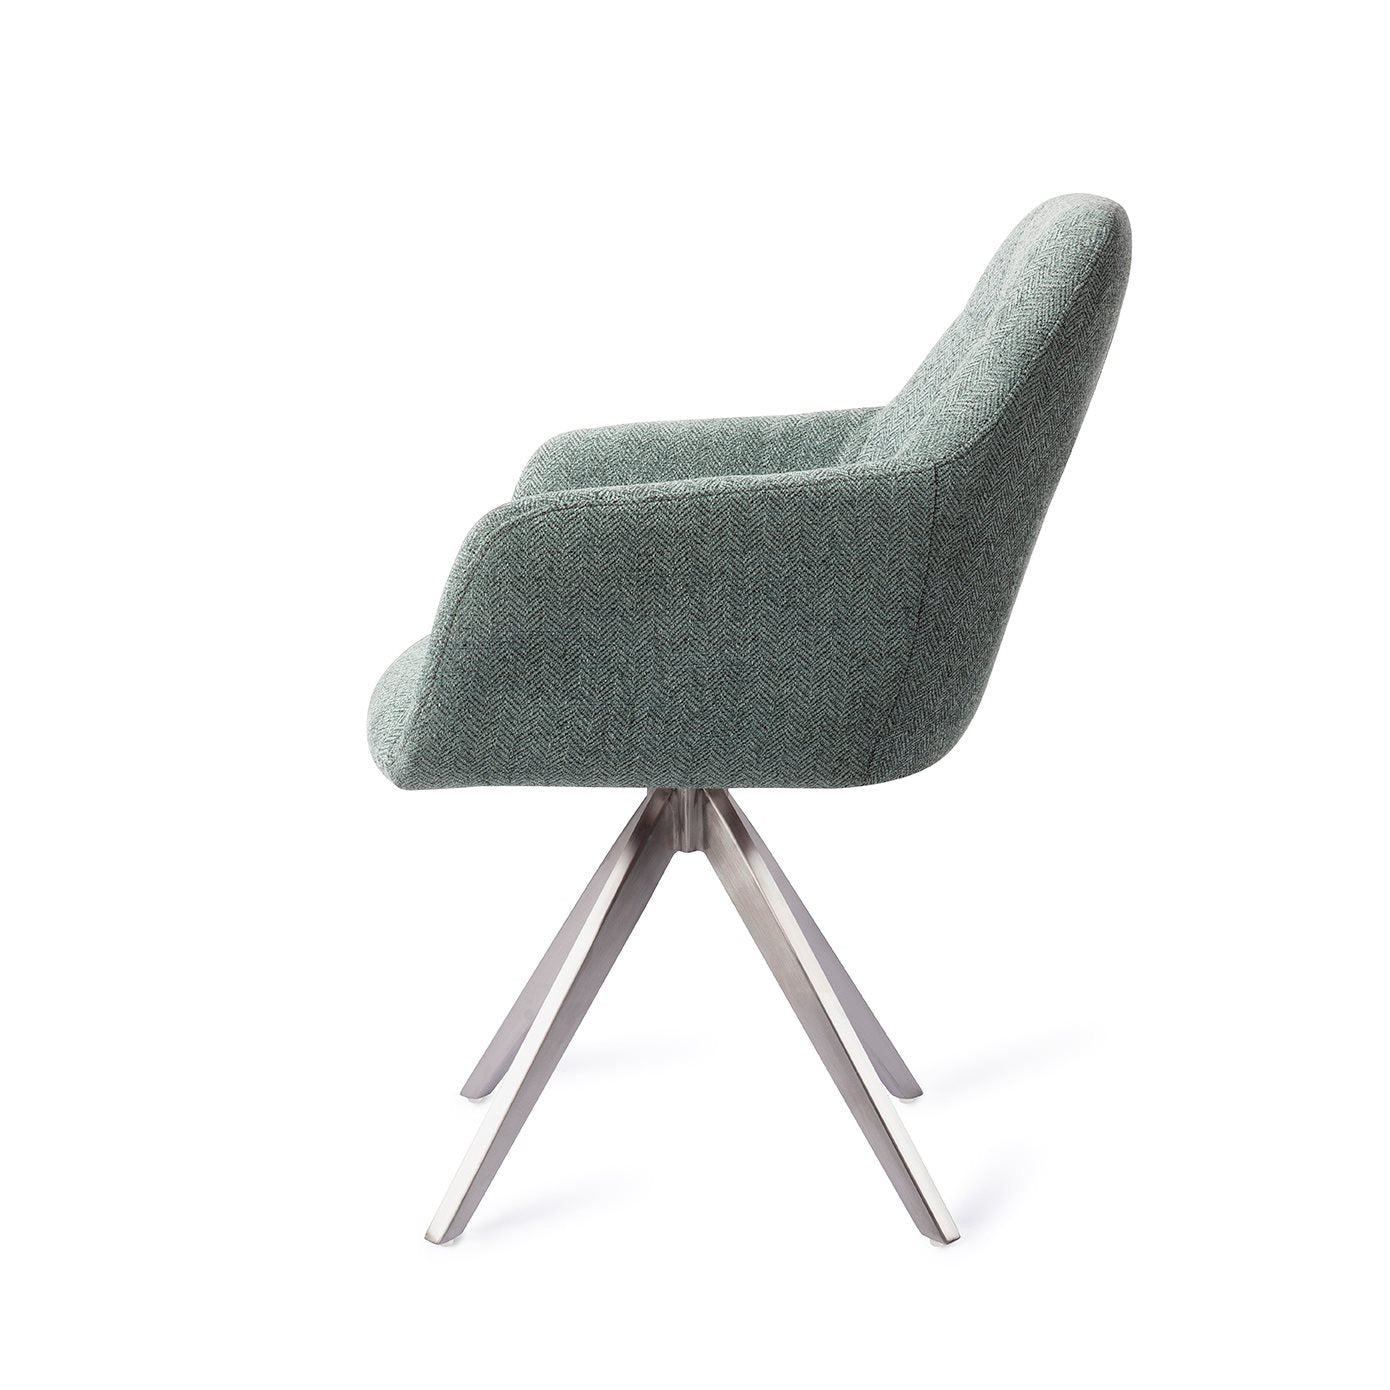 Noto Dining Chair Real Teal Turn Steel